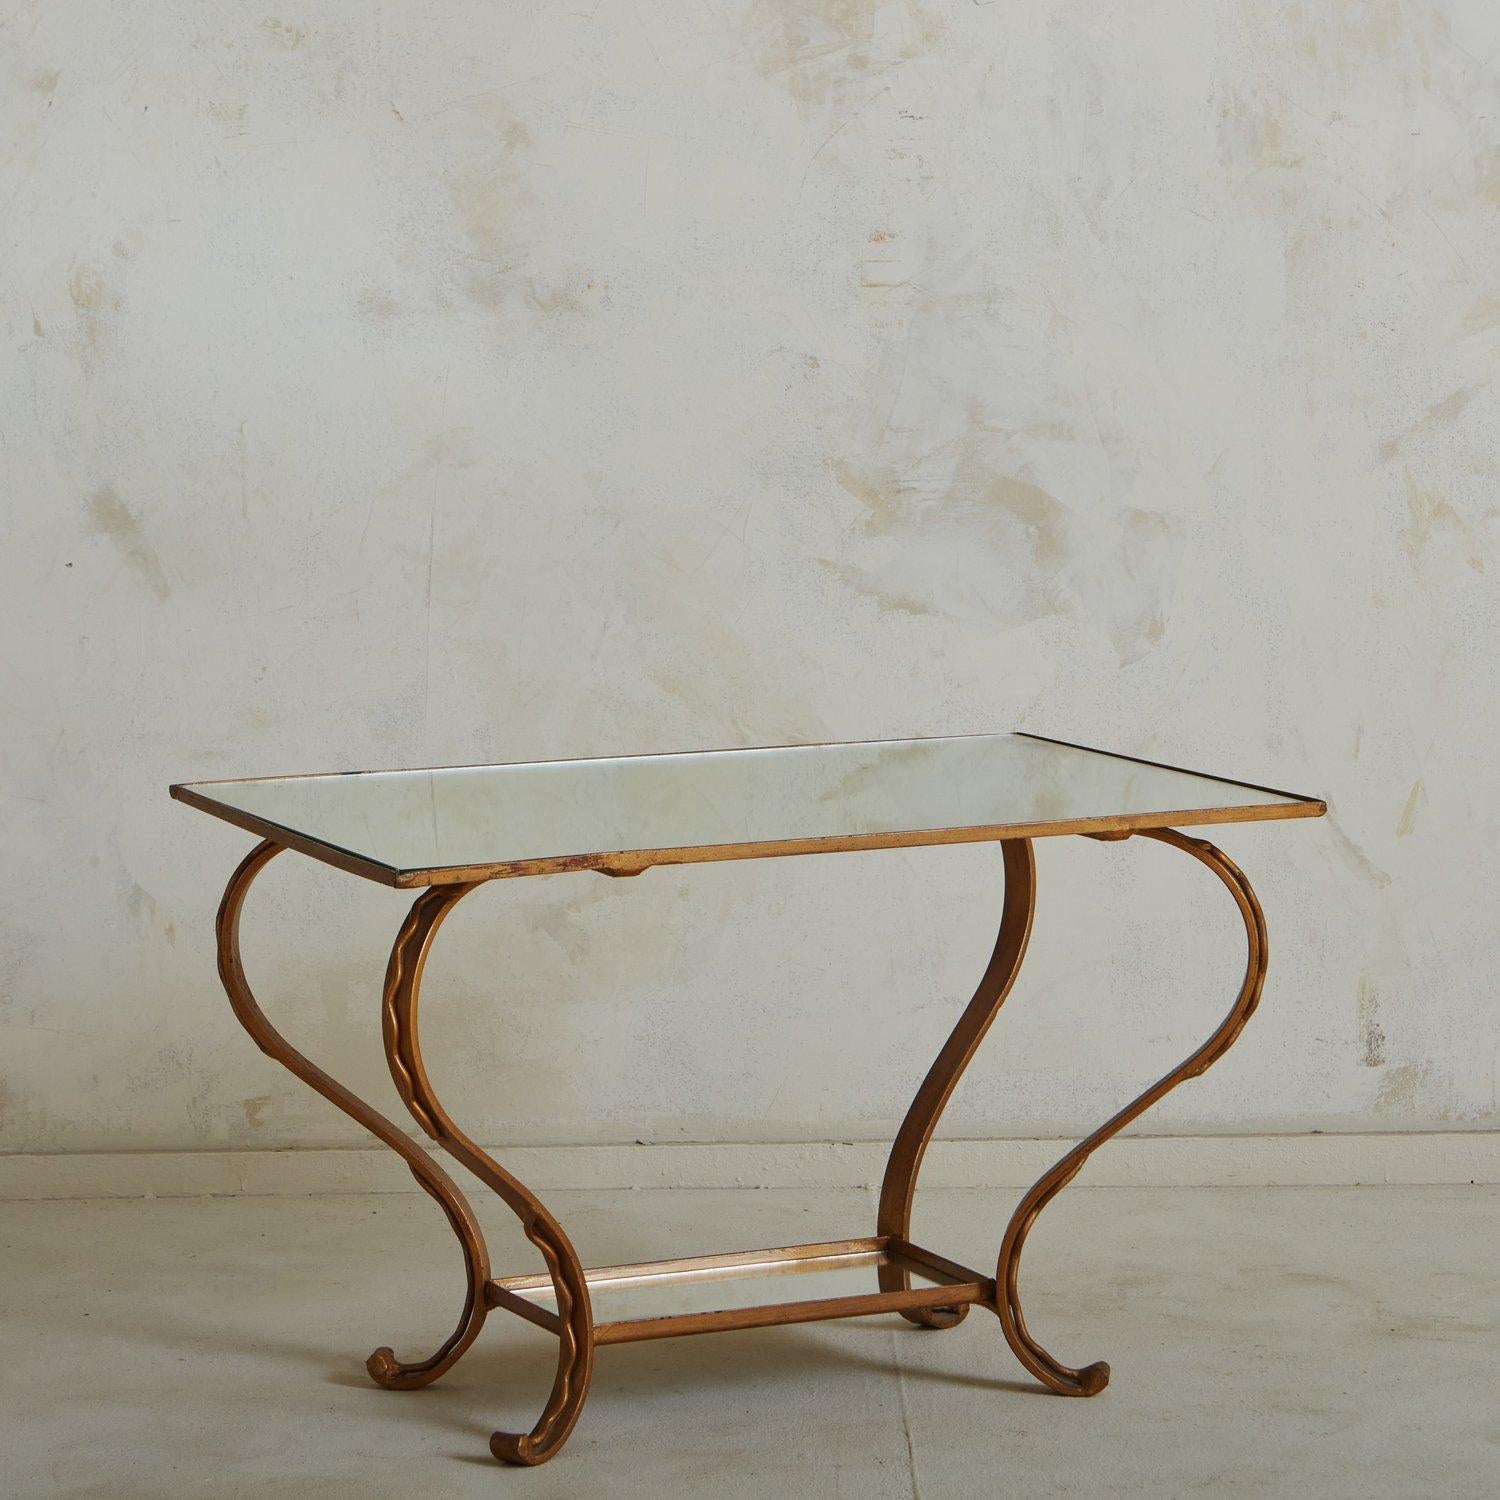 A 1950s French coffee table featuring a metal base with a beautiful hand applied gold leaf finish. This table has curved legs, which have an overlaid metal squiggle design. It has an inset rectangular mirrored tabletop and a lower mirrored tier